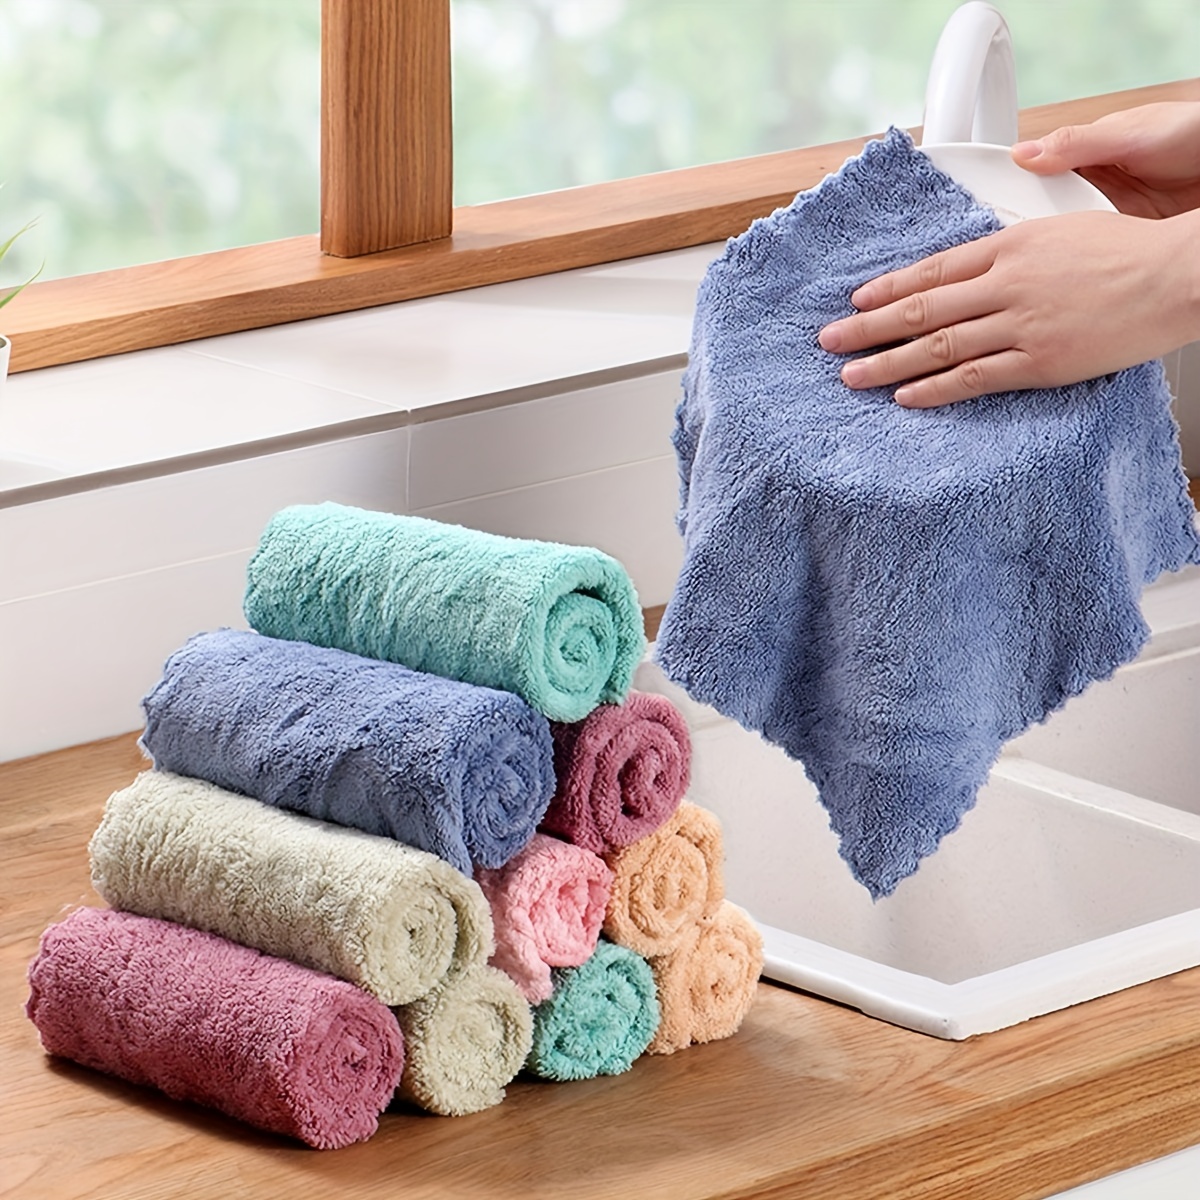 10pcs Microfiber Towel Absorbent Kitchen Cleaning Cloth Non-stick